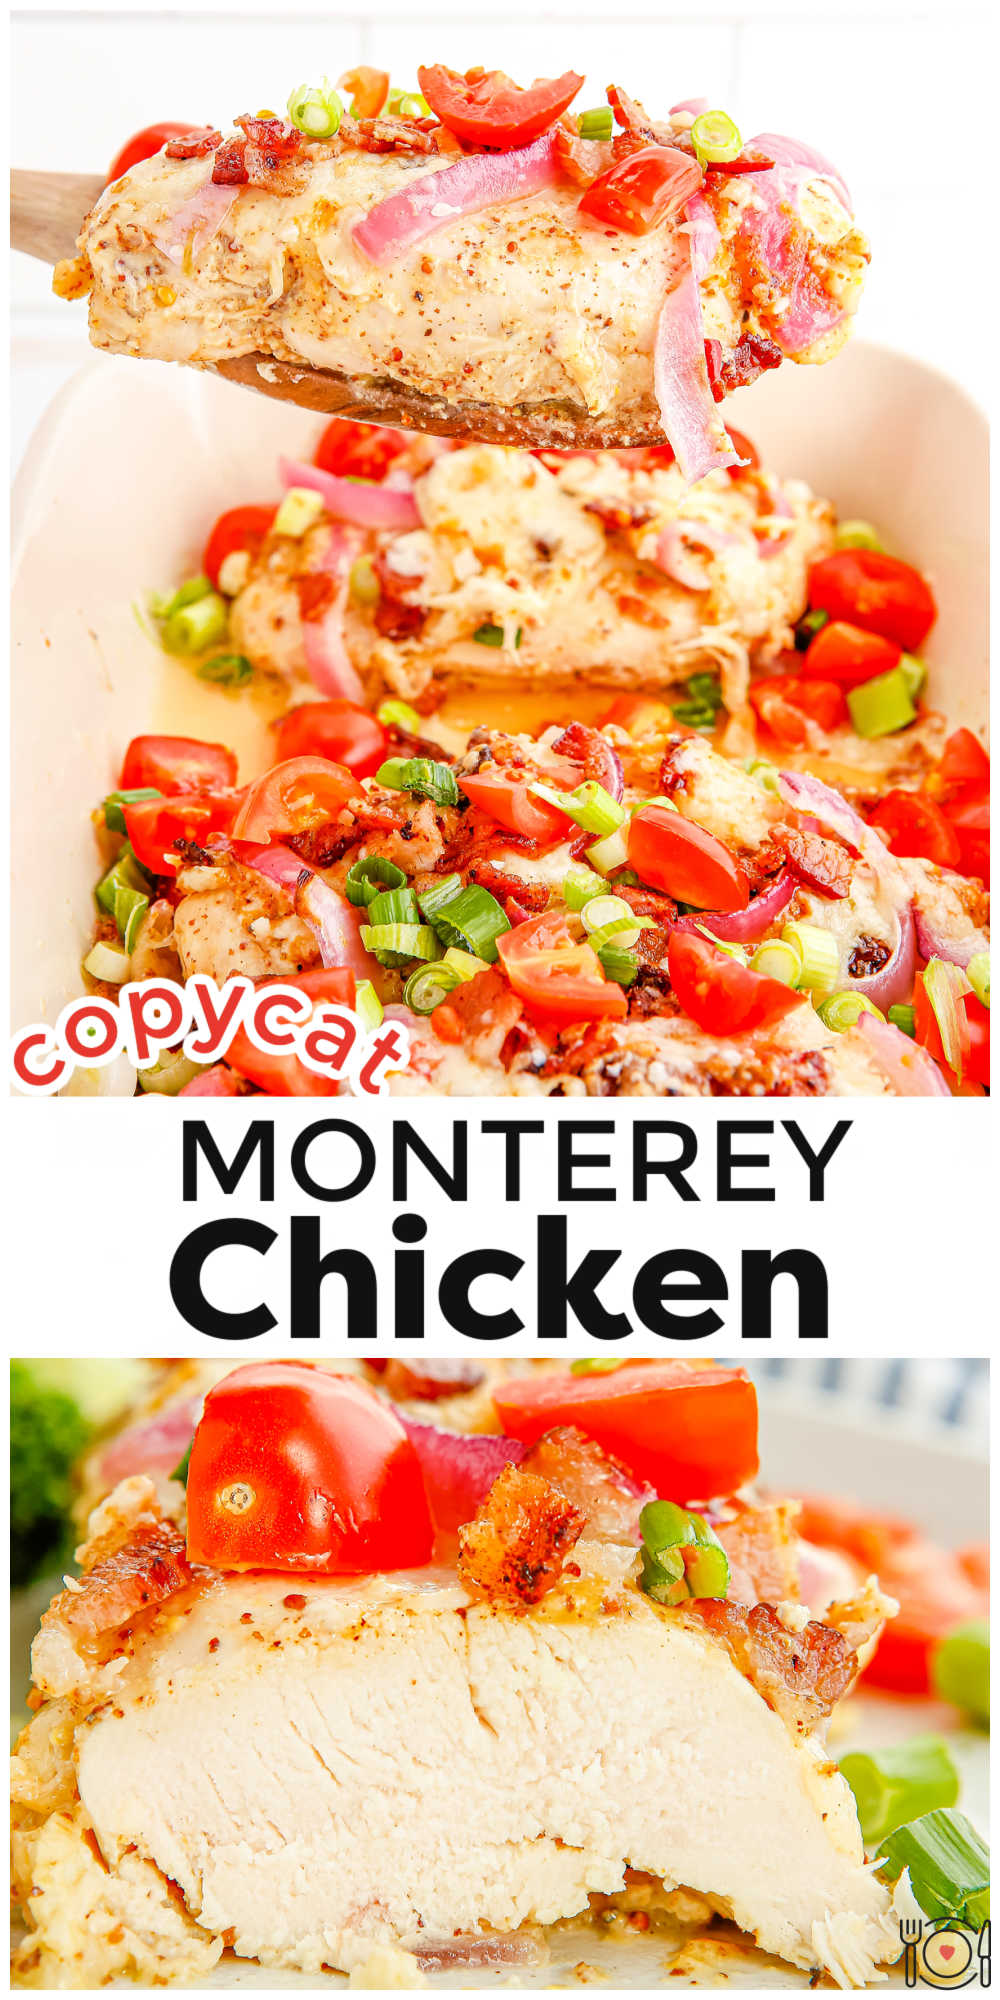 This Copycat Monterey Chicken recipe is the perfect combination of honey-mustard chicken breasts, bacon, and melted Monterey Jack cheese. See how easy it is to make this easy and crave-worthy restaurant favorite at home! via @foodfolksandfun